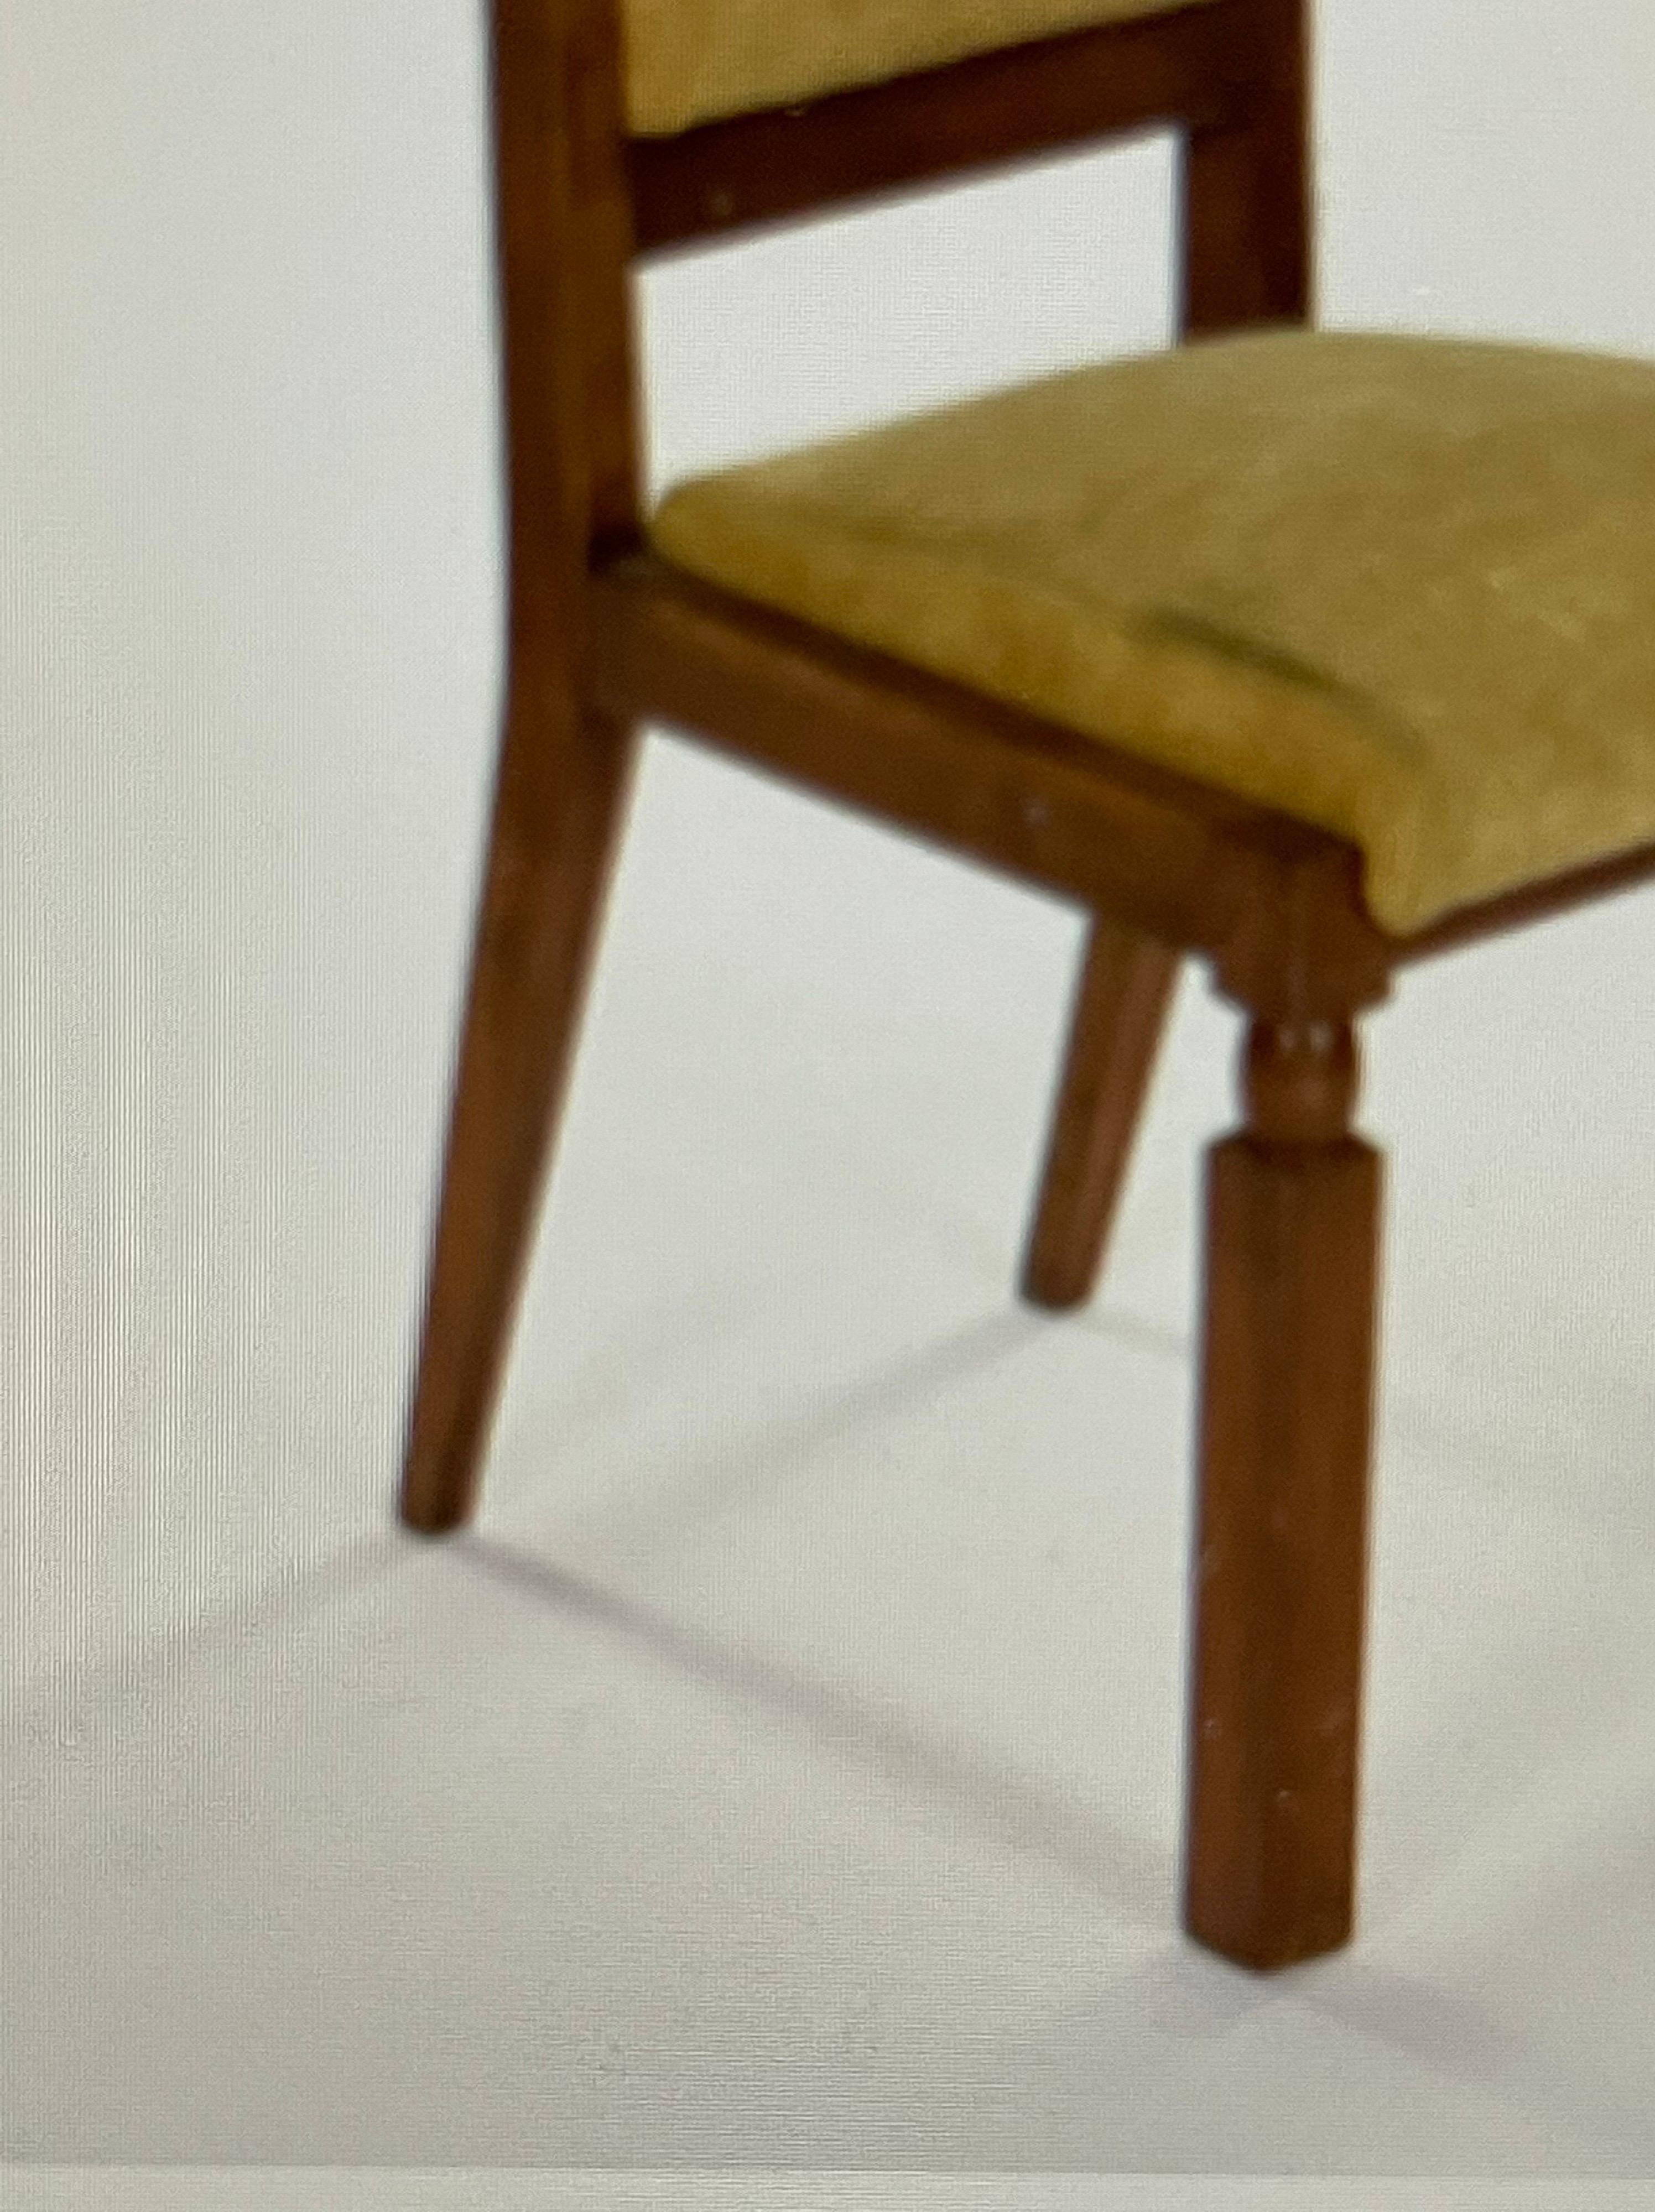 In the spirit of Maxime old high back chair in oak stained walnut circa 1940.